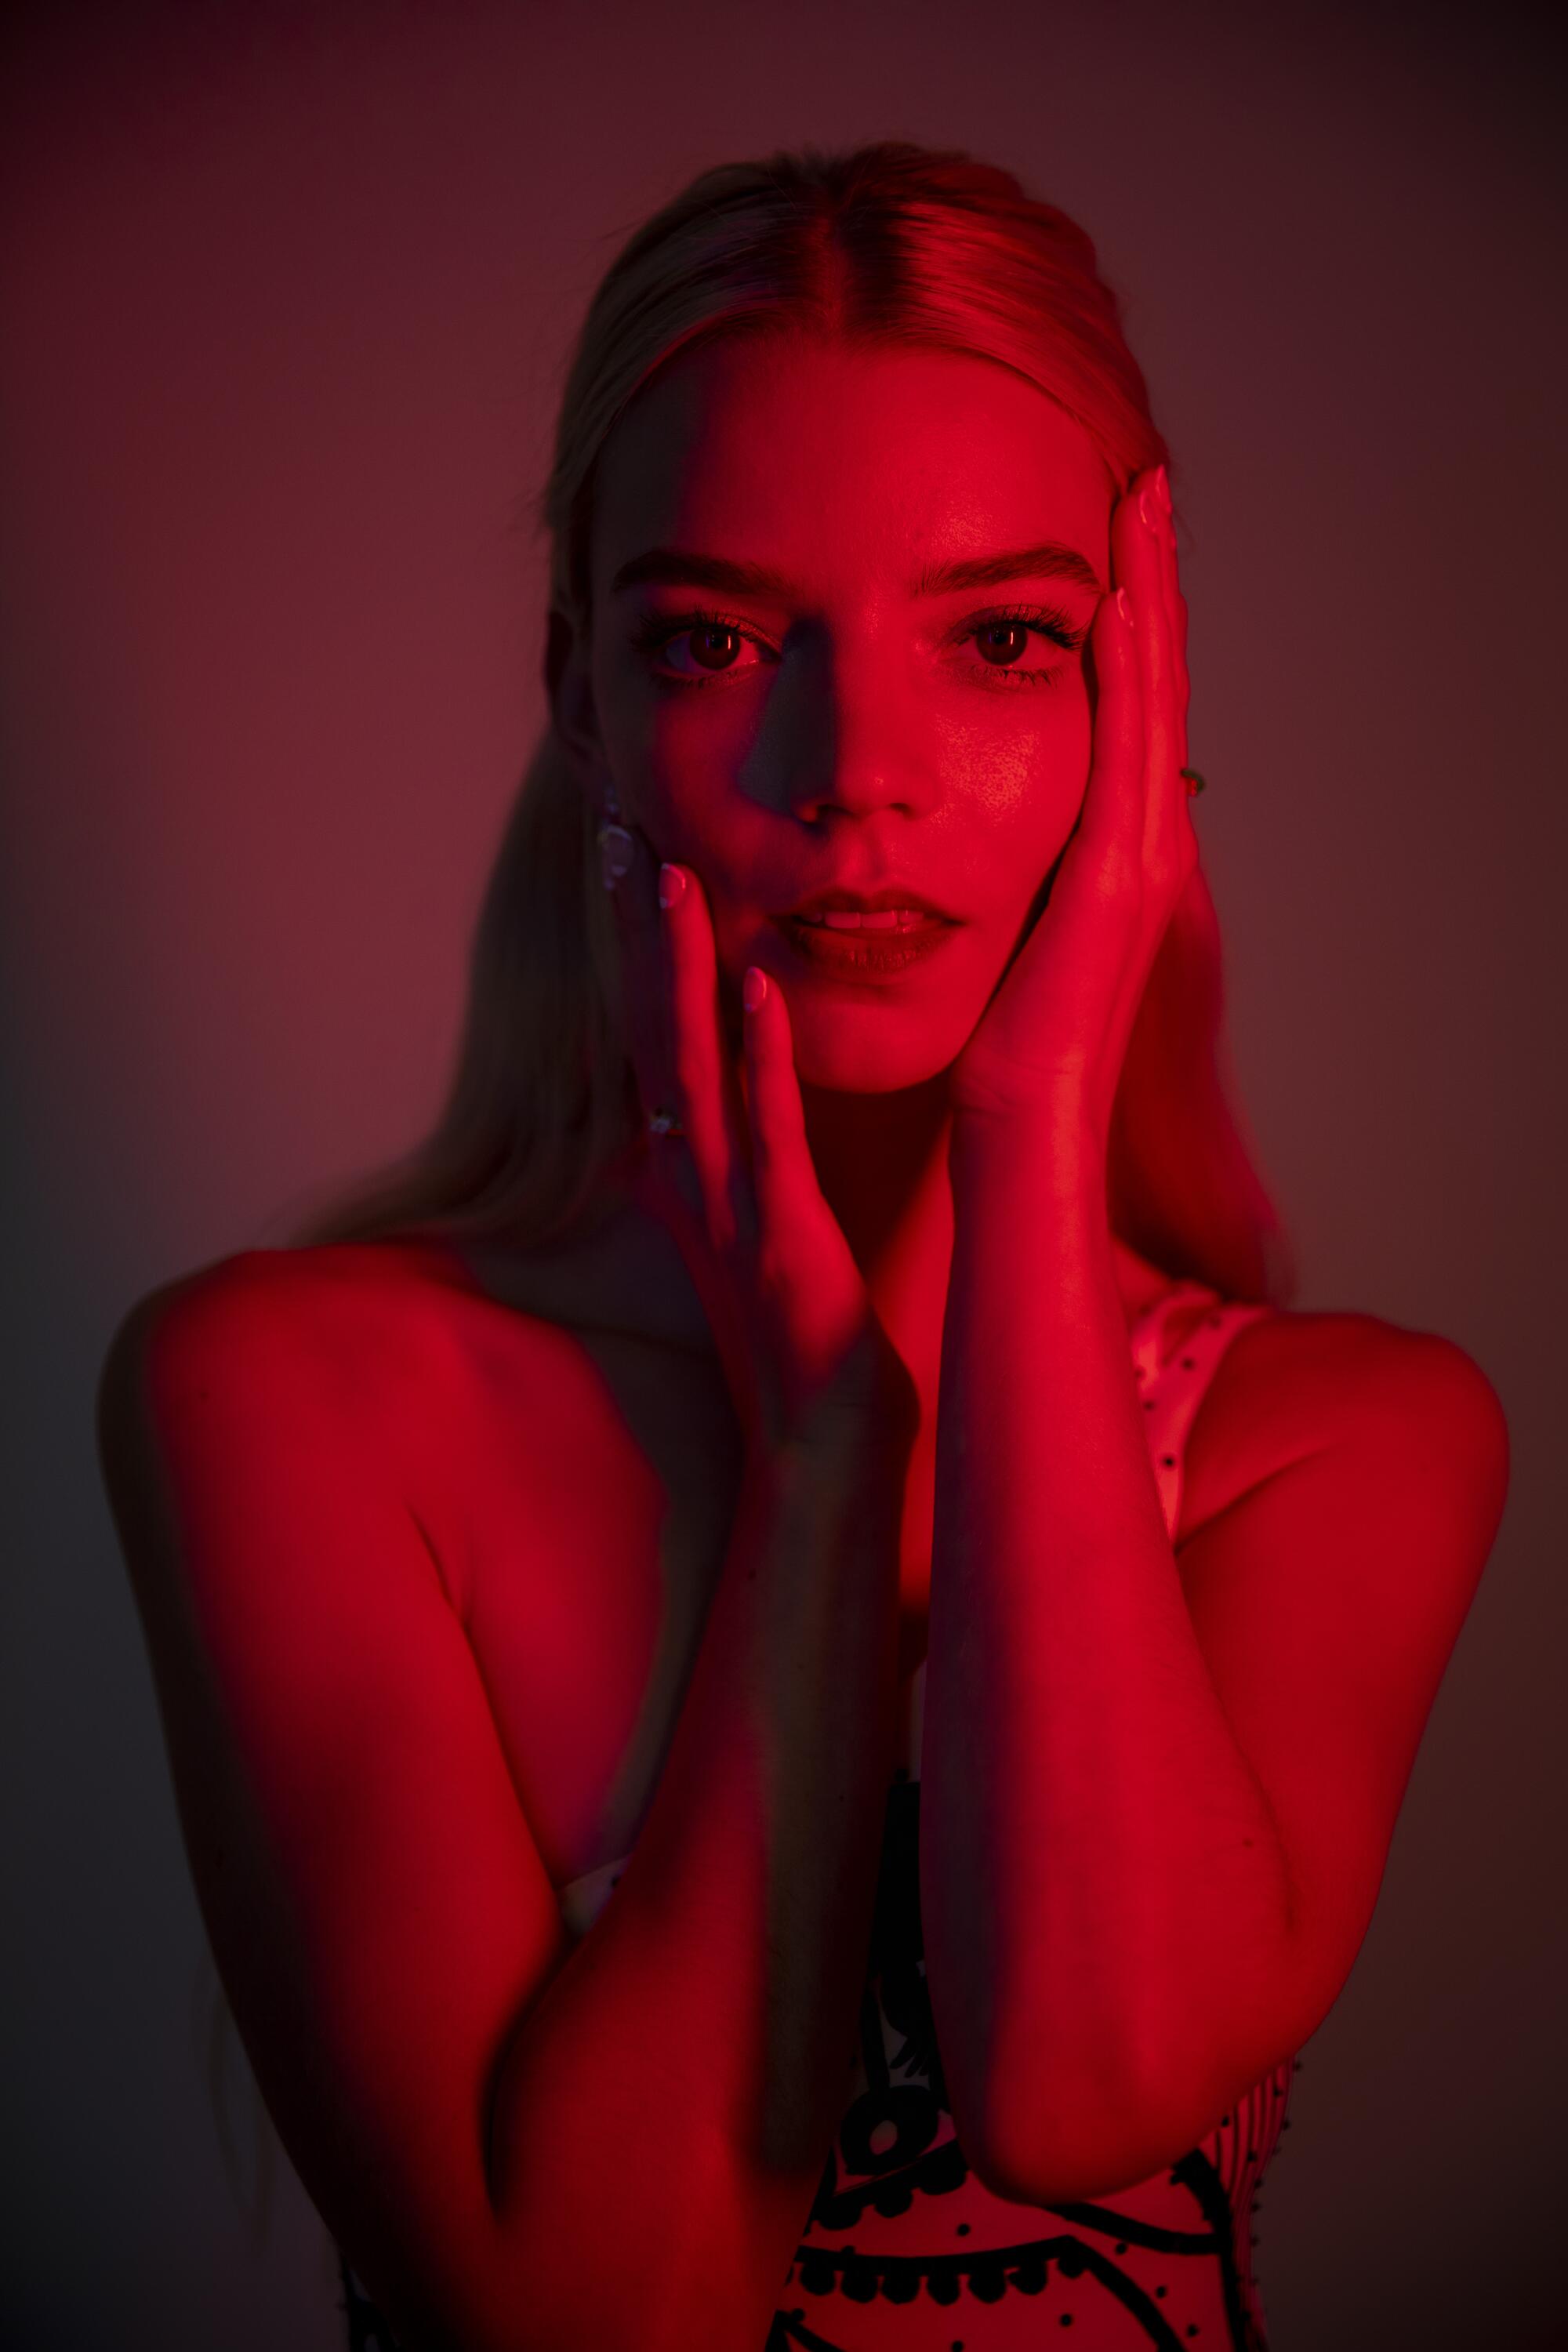 Anya Taylor-Joy is keeping busy on back-to-back projects.